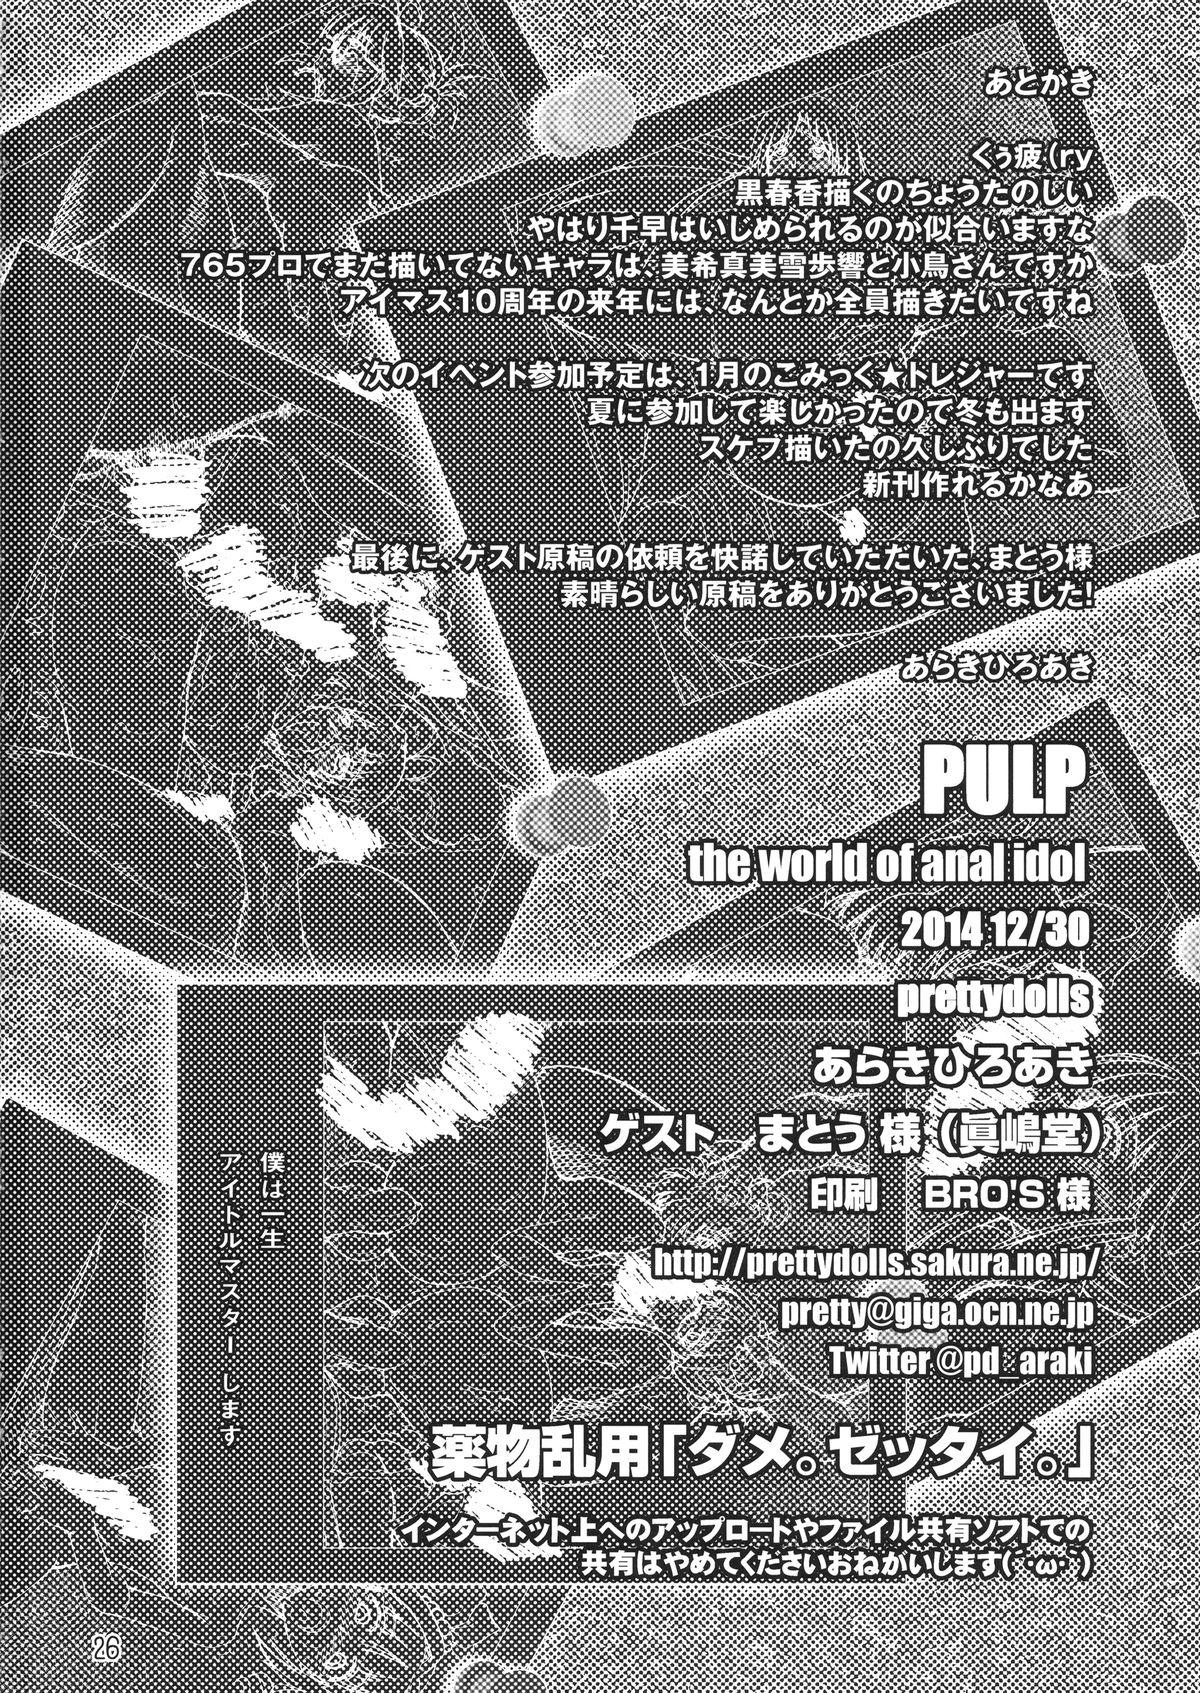 PULP the world of anal idol 25